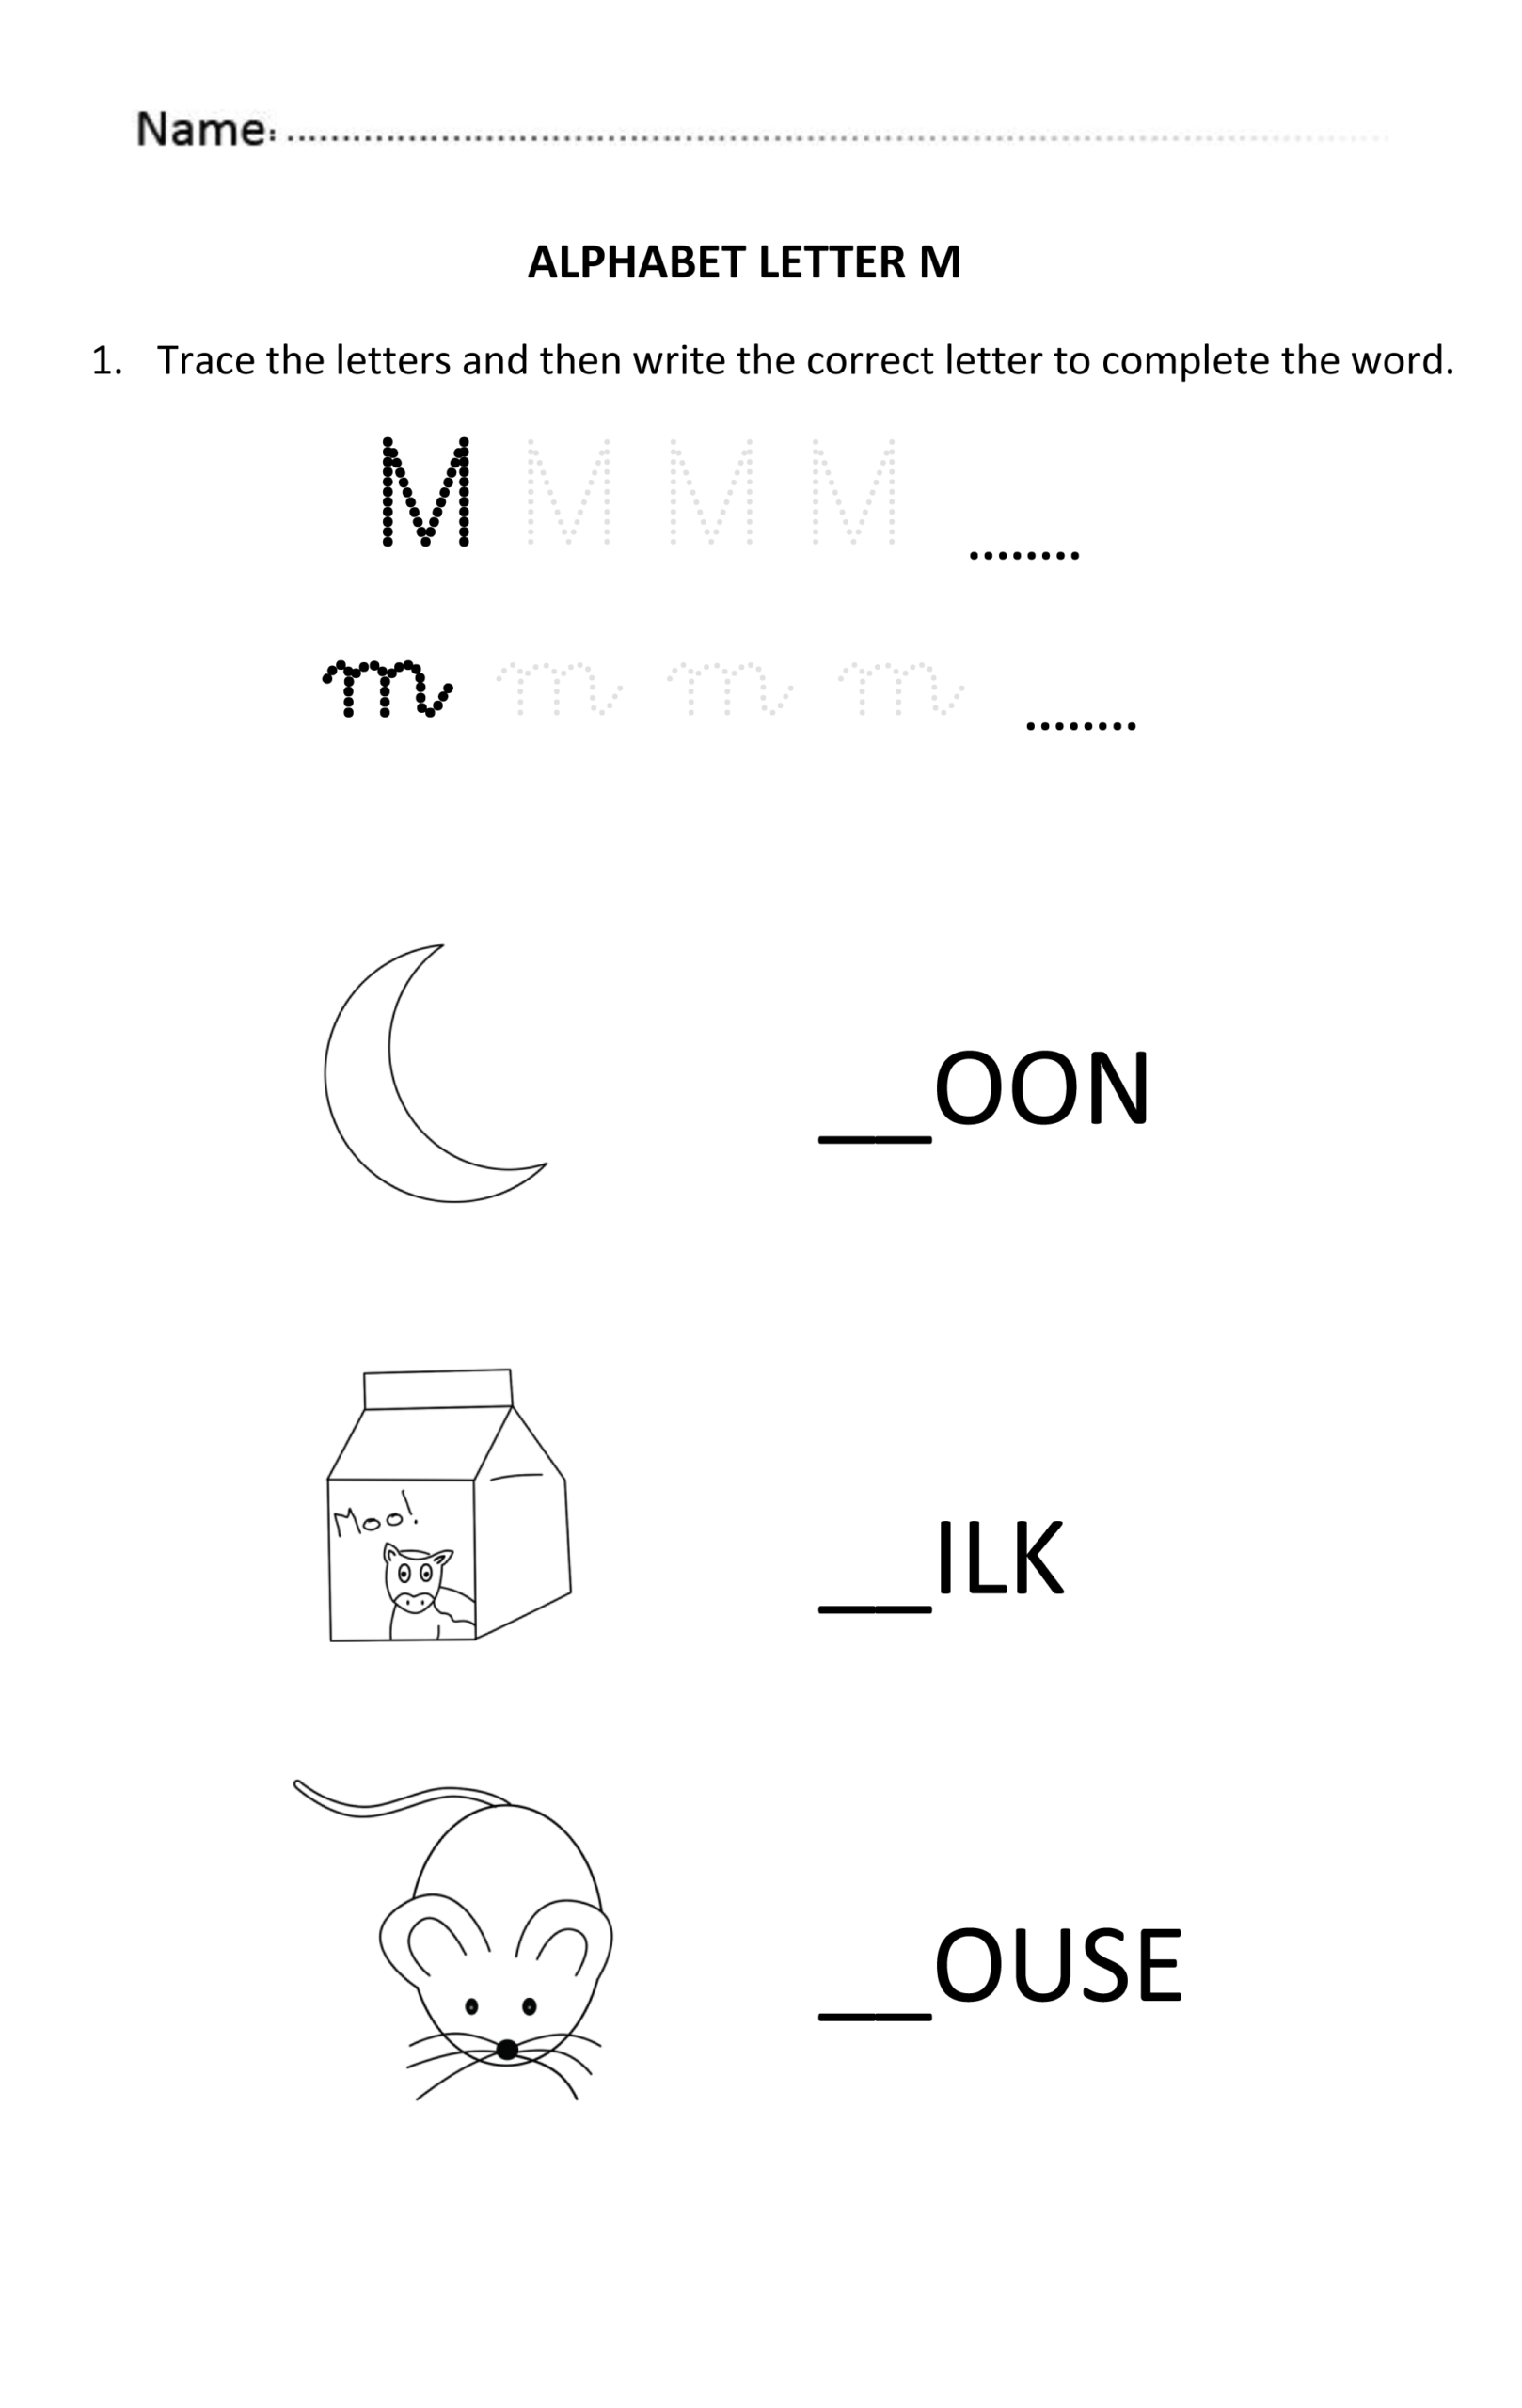 Learning And Writing Letter M For 5 And 6 Years Old Students throughout Alphabet Worksheets For 5 Year Olds